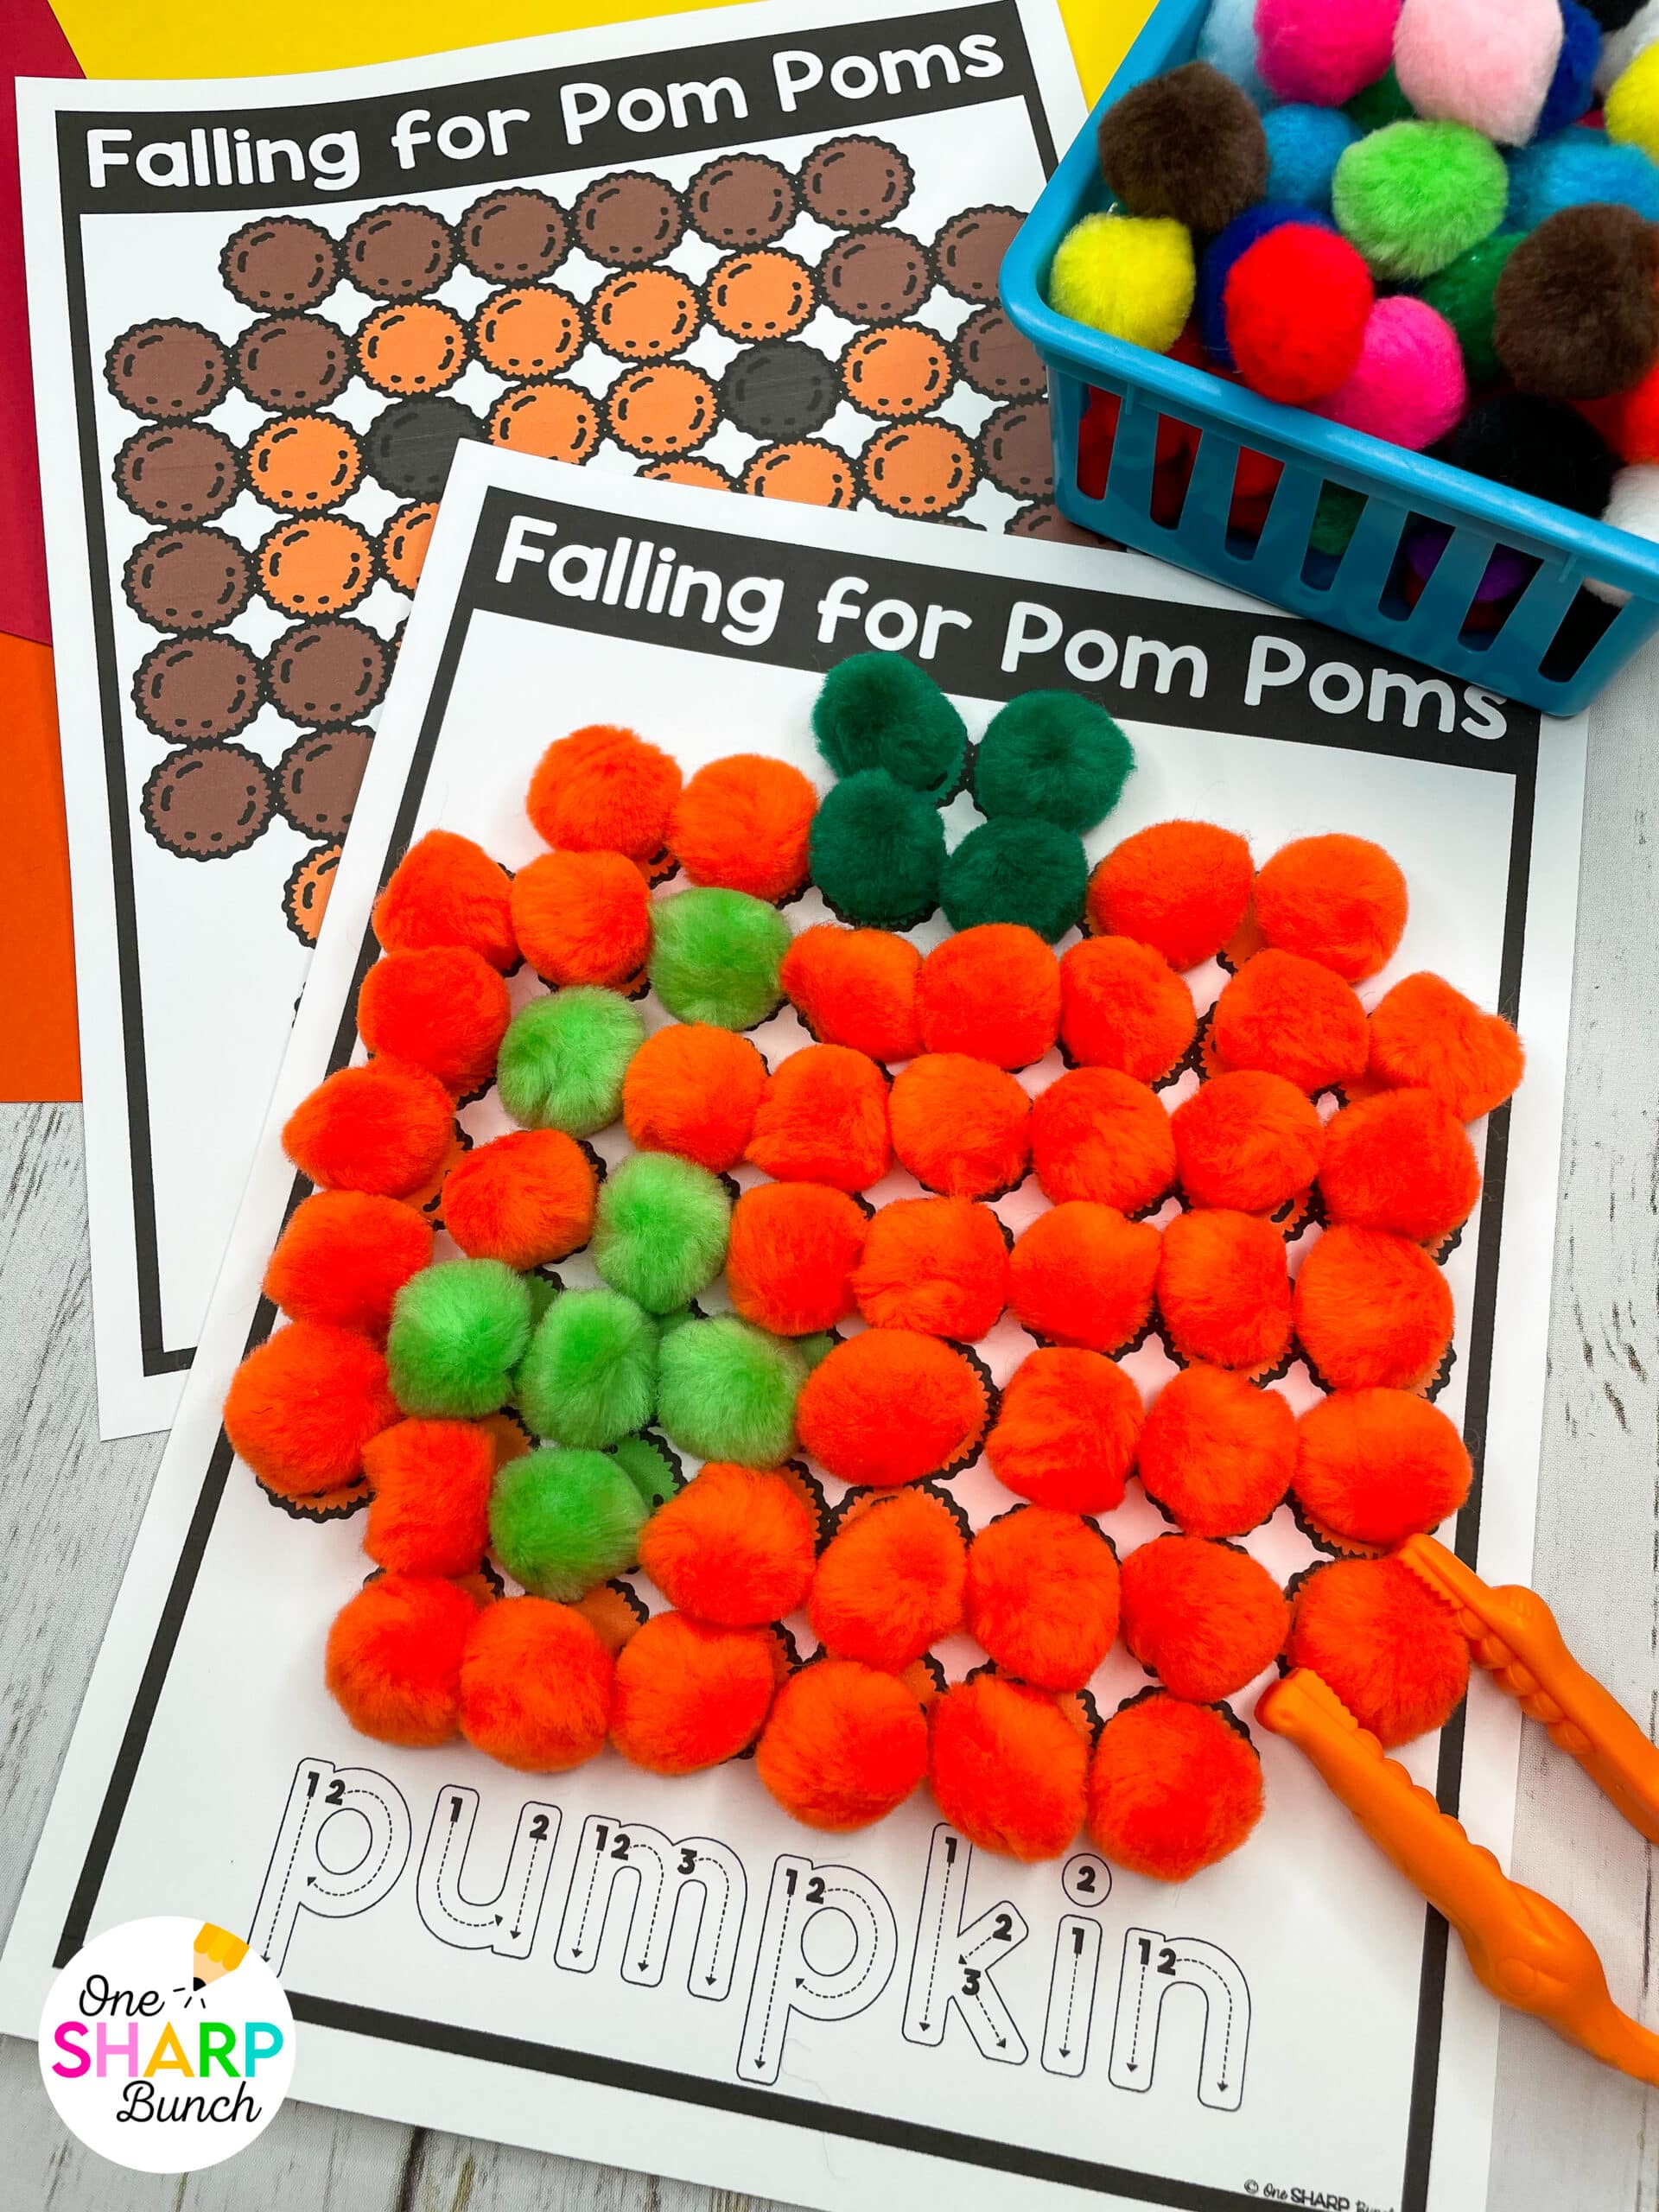 Fine motor activities in the classroom are essential for preschool, kindergarten, and first grade students to build fine motor skills. Use these classroom supplies, which are great for fine motor practice and sensory activities, as fine motor tools for the classroom. Learn how to use these simple fine motor tools for kids, including tweezers, pom poms, clothespins, etc. Discover fine motor activities for kids and name activities that are great for pincer grasp, hand-eye coordination, and more!